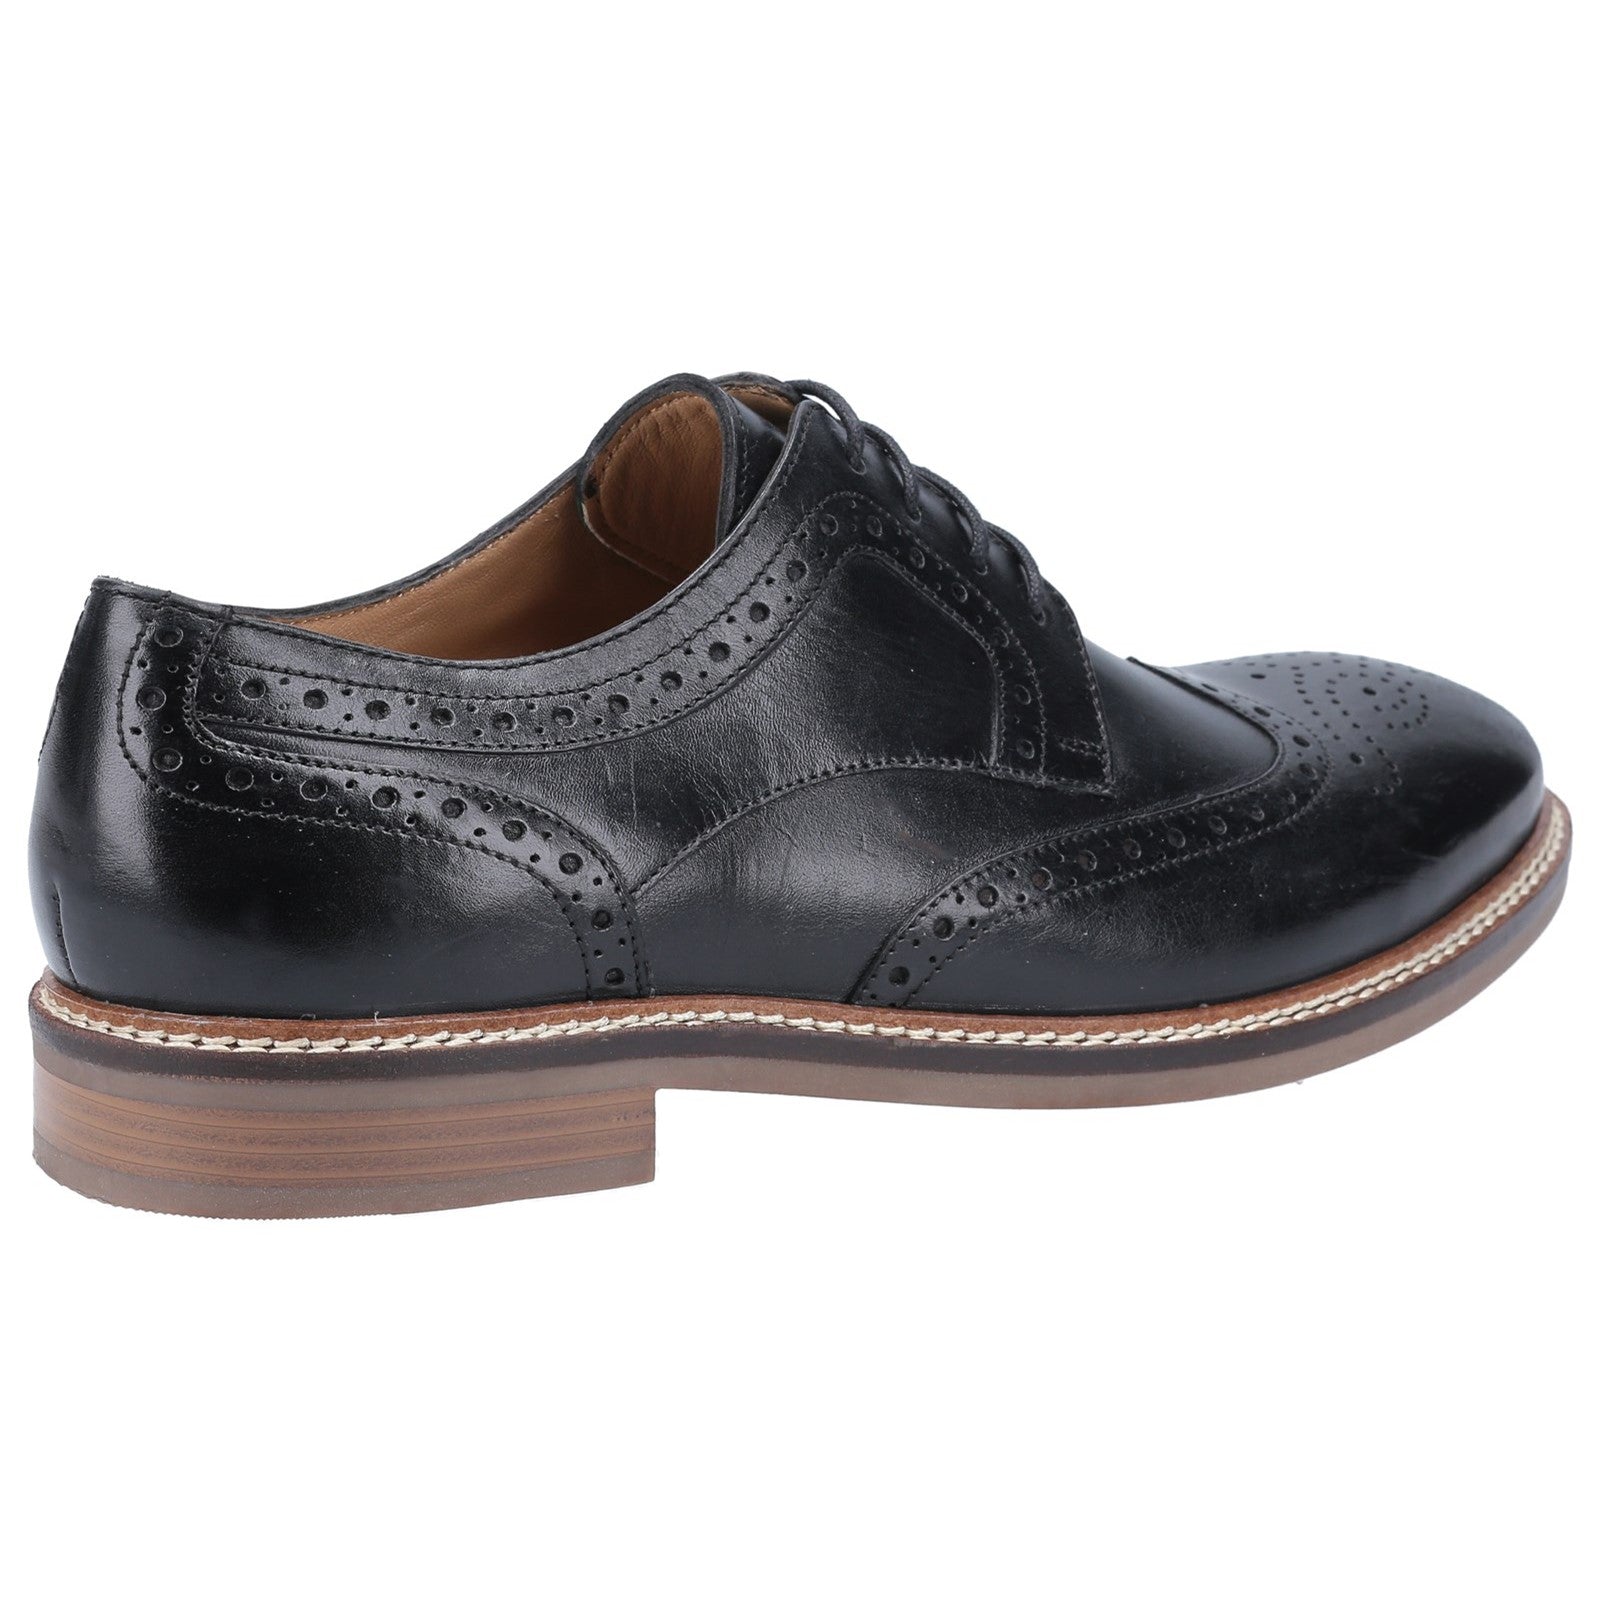 Hush Puppies Mens Bryson Leather Shoes - Black